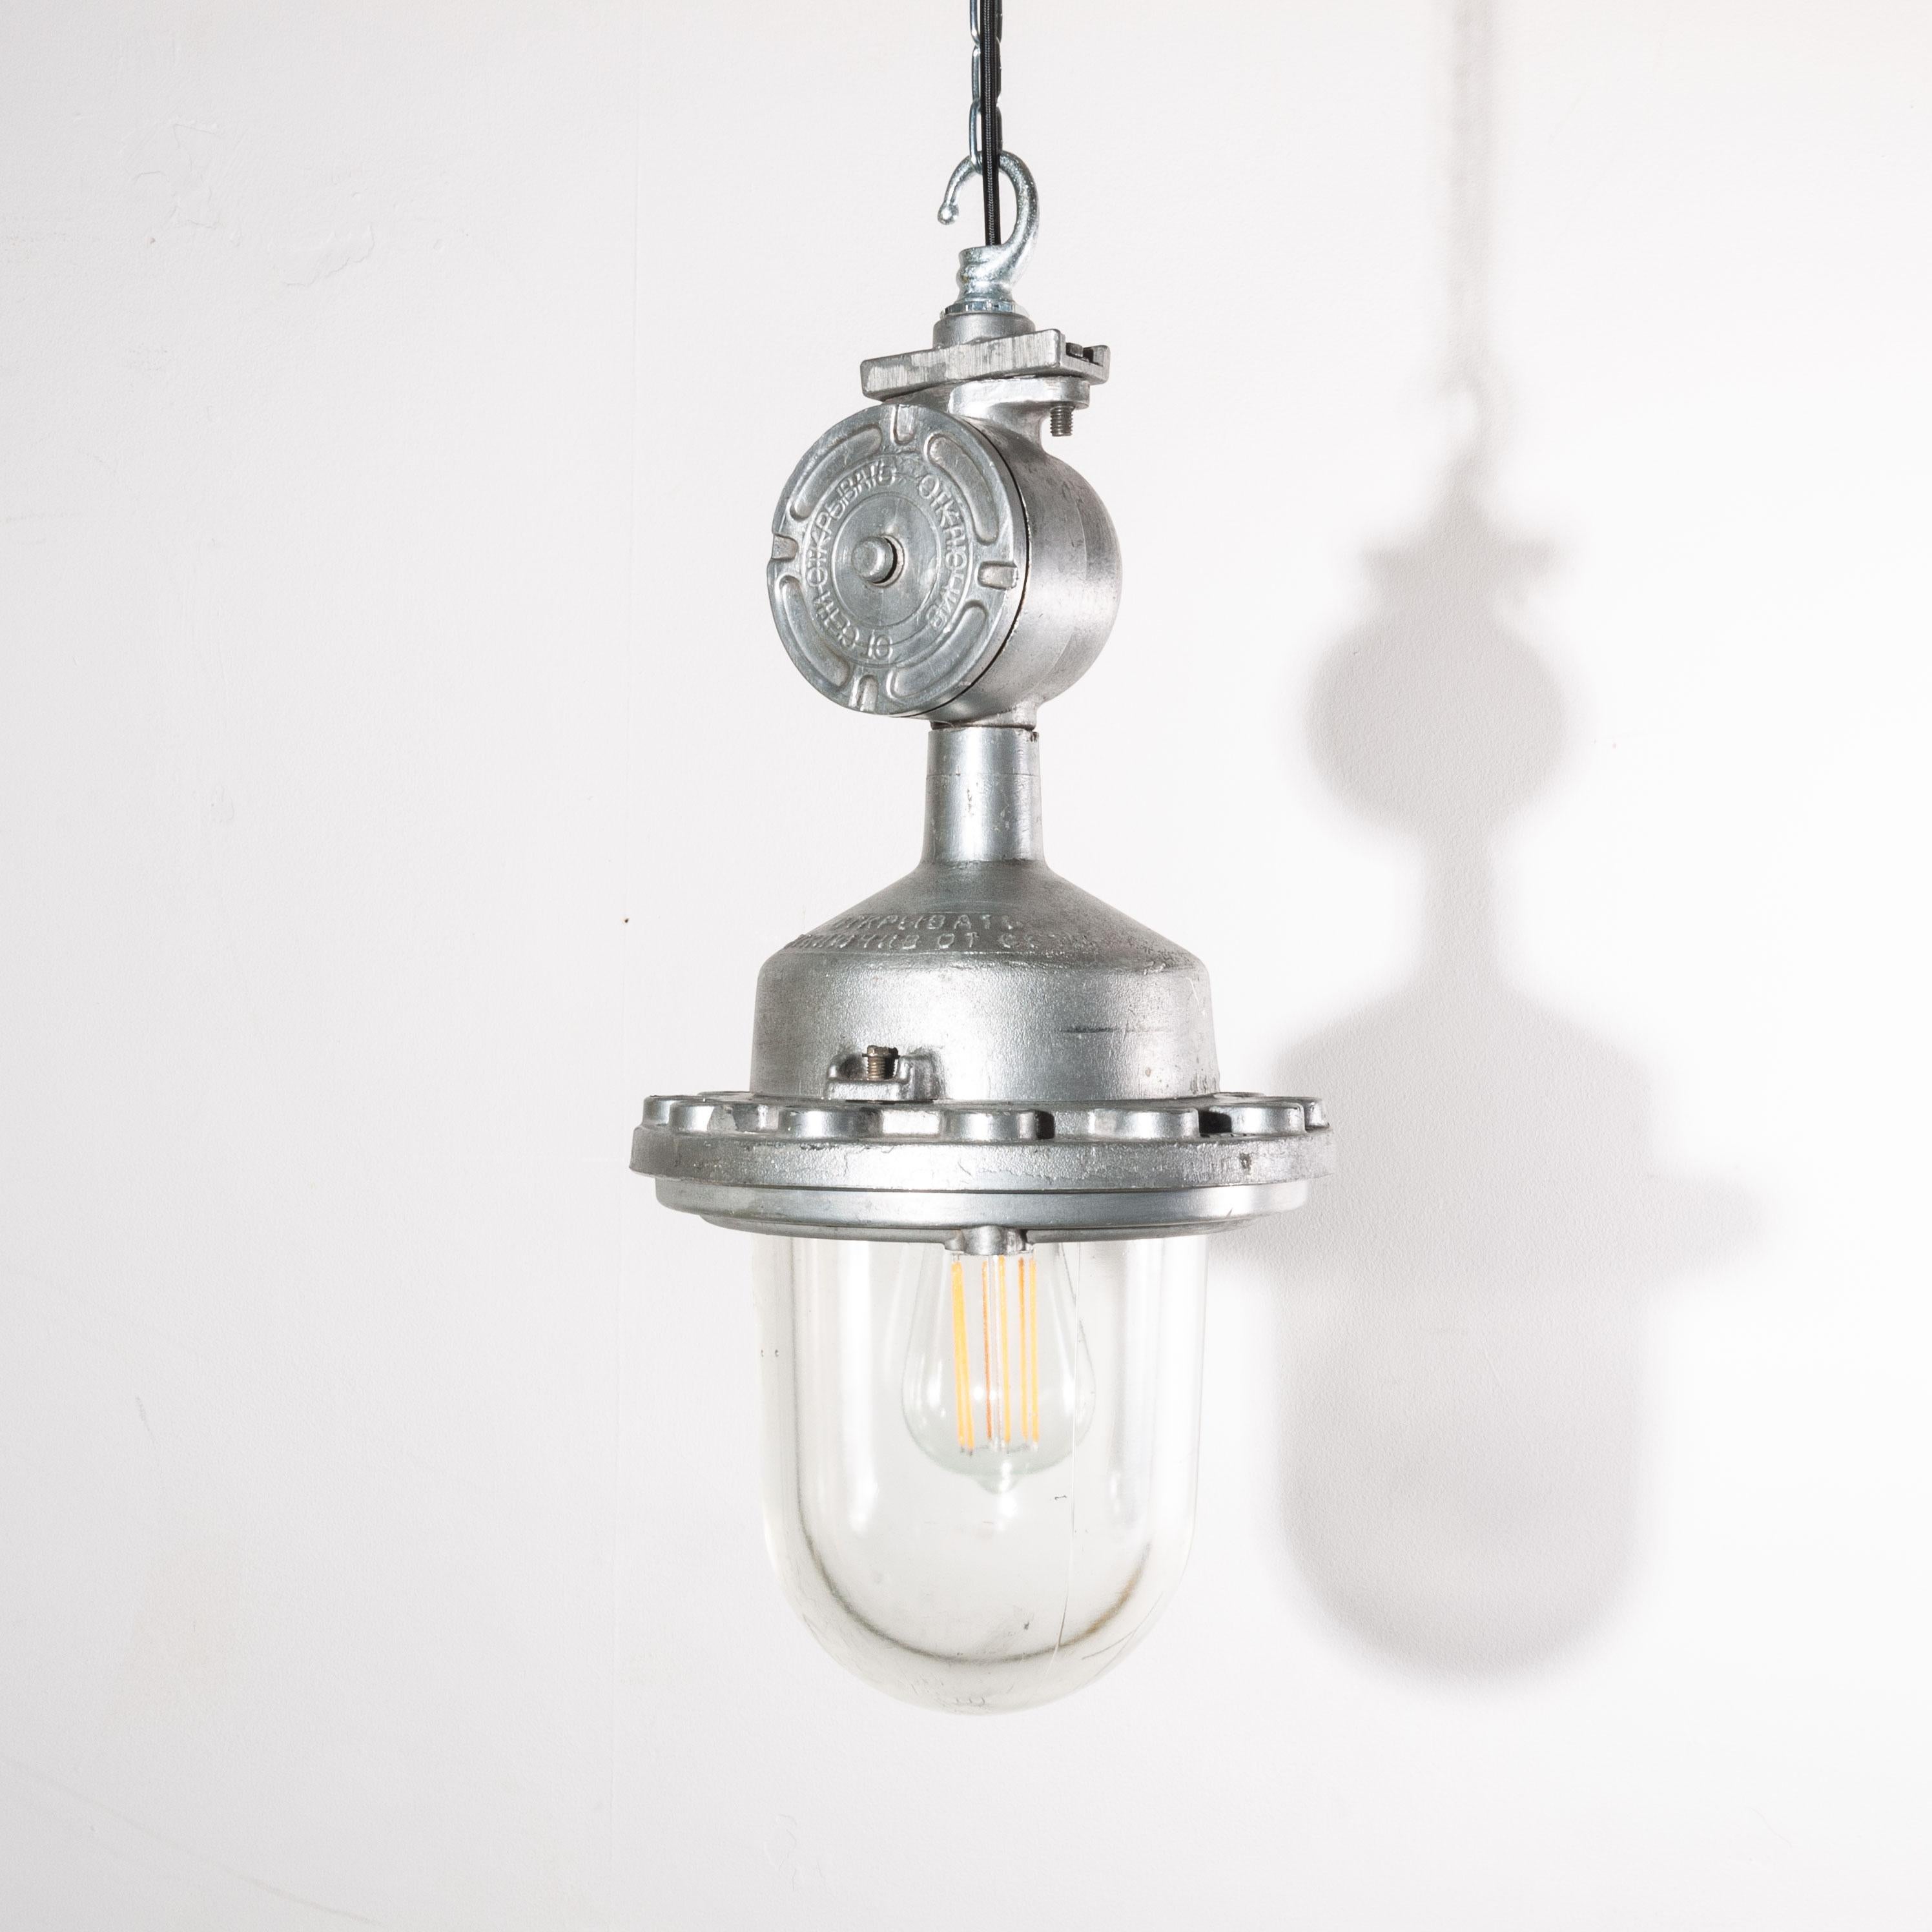 Mid-20th Century 1960s Industrial Explosion Proof Ceiling Pendant Lamps/Lights, with Glass Dome